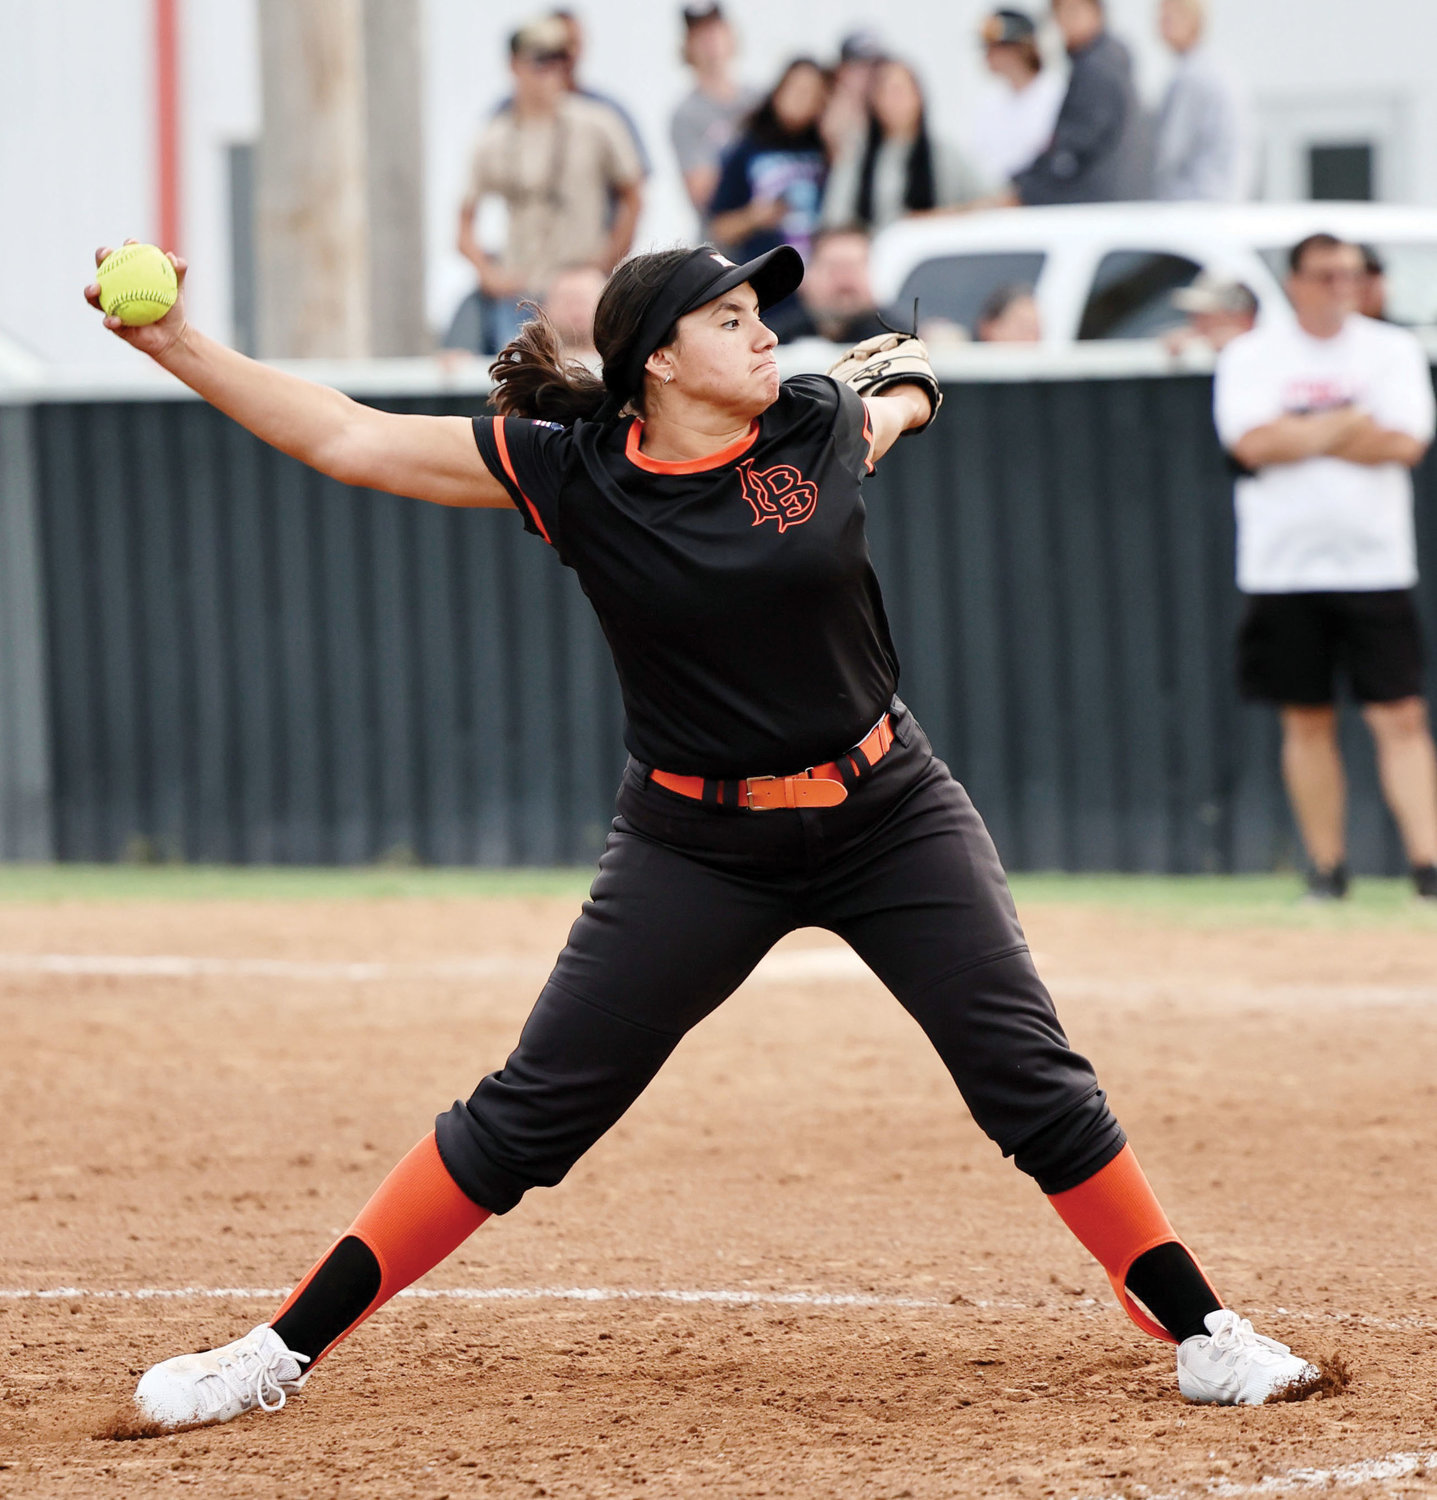 Lexington senior Cora Vasquez delivers a pitch for the Bulldogs from the pitcher’s circle. Lexington opens the Sterling tournament today (Thursday) against Lawton Ike at 12:30.